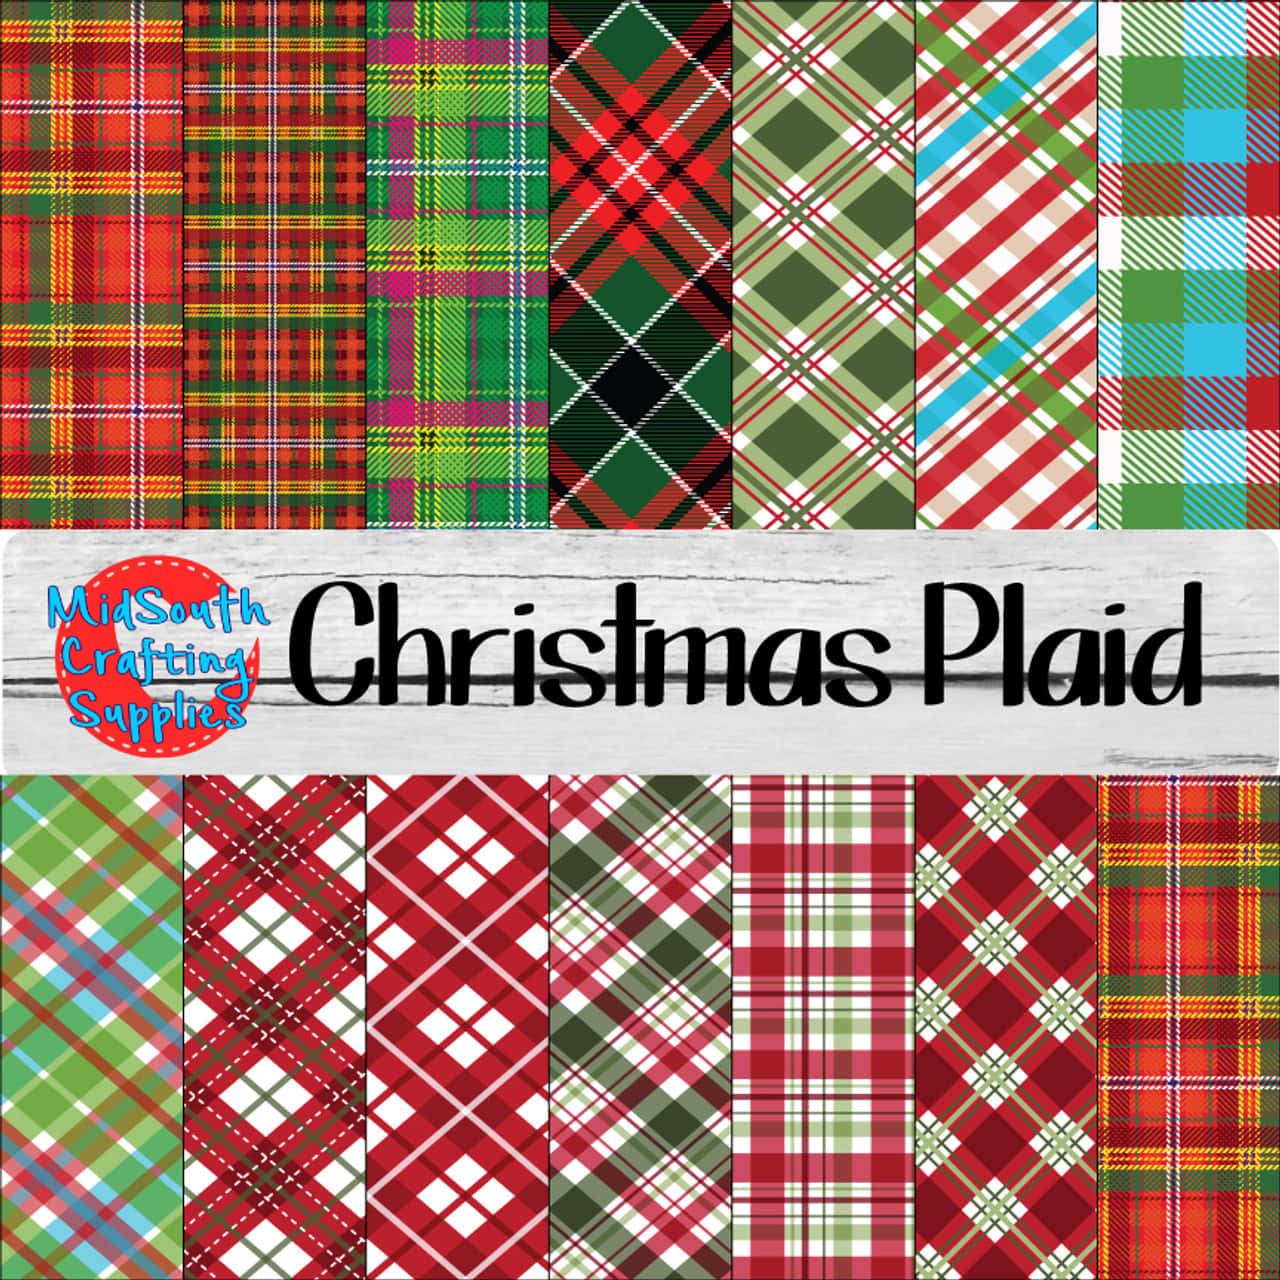 Delight in the warm embrace of Christmas plaid